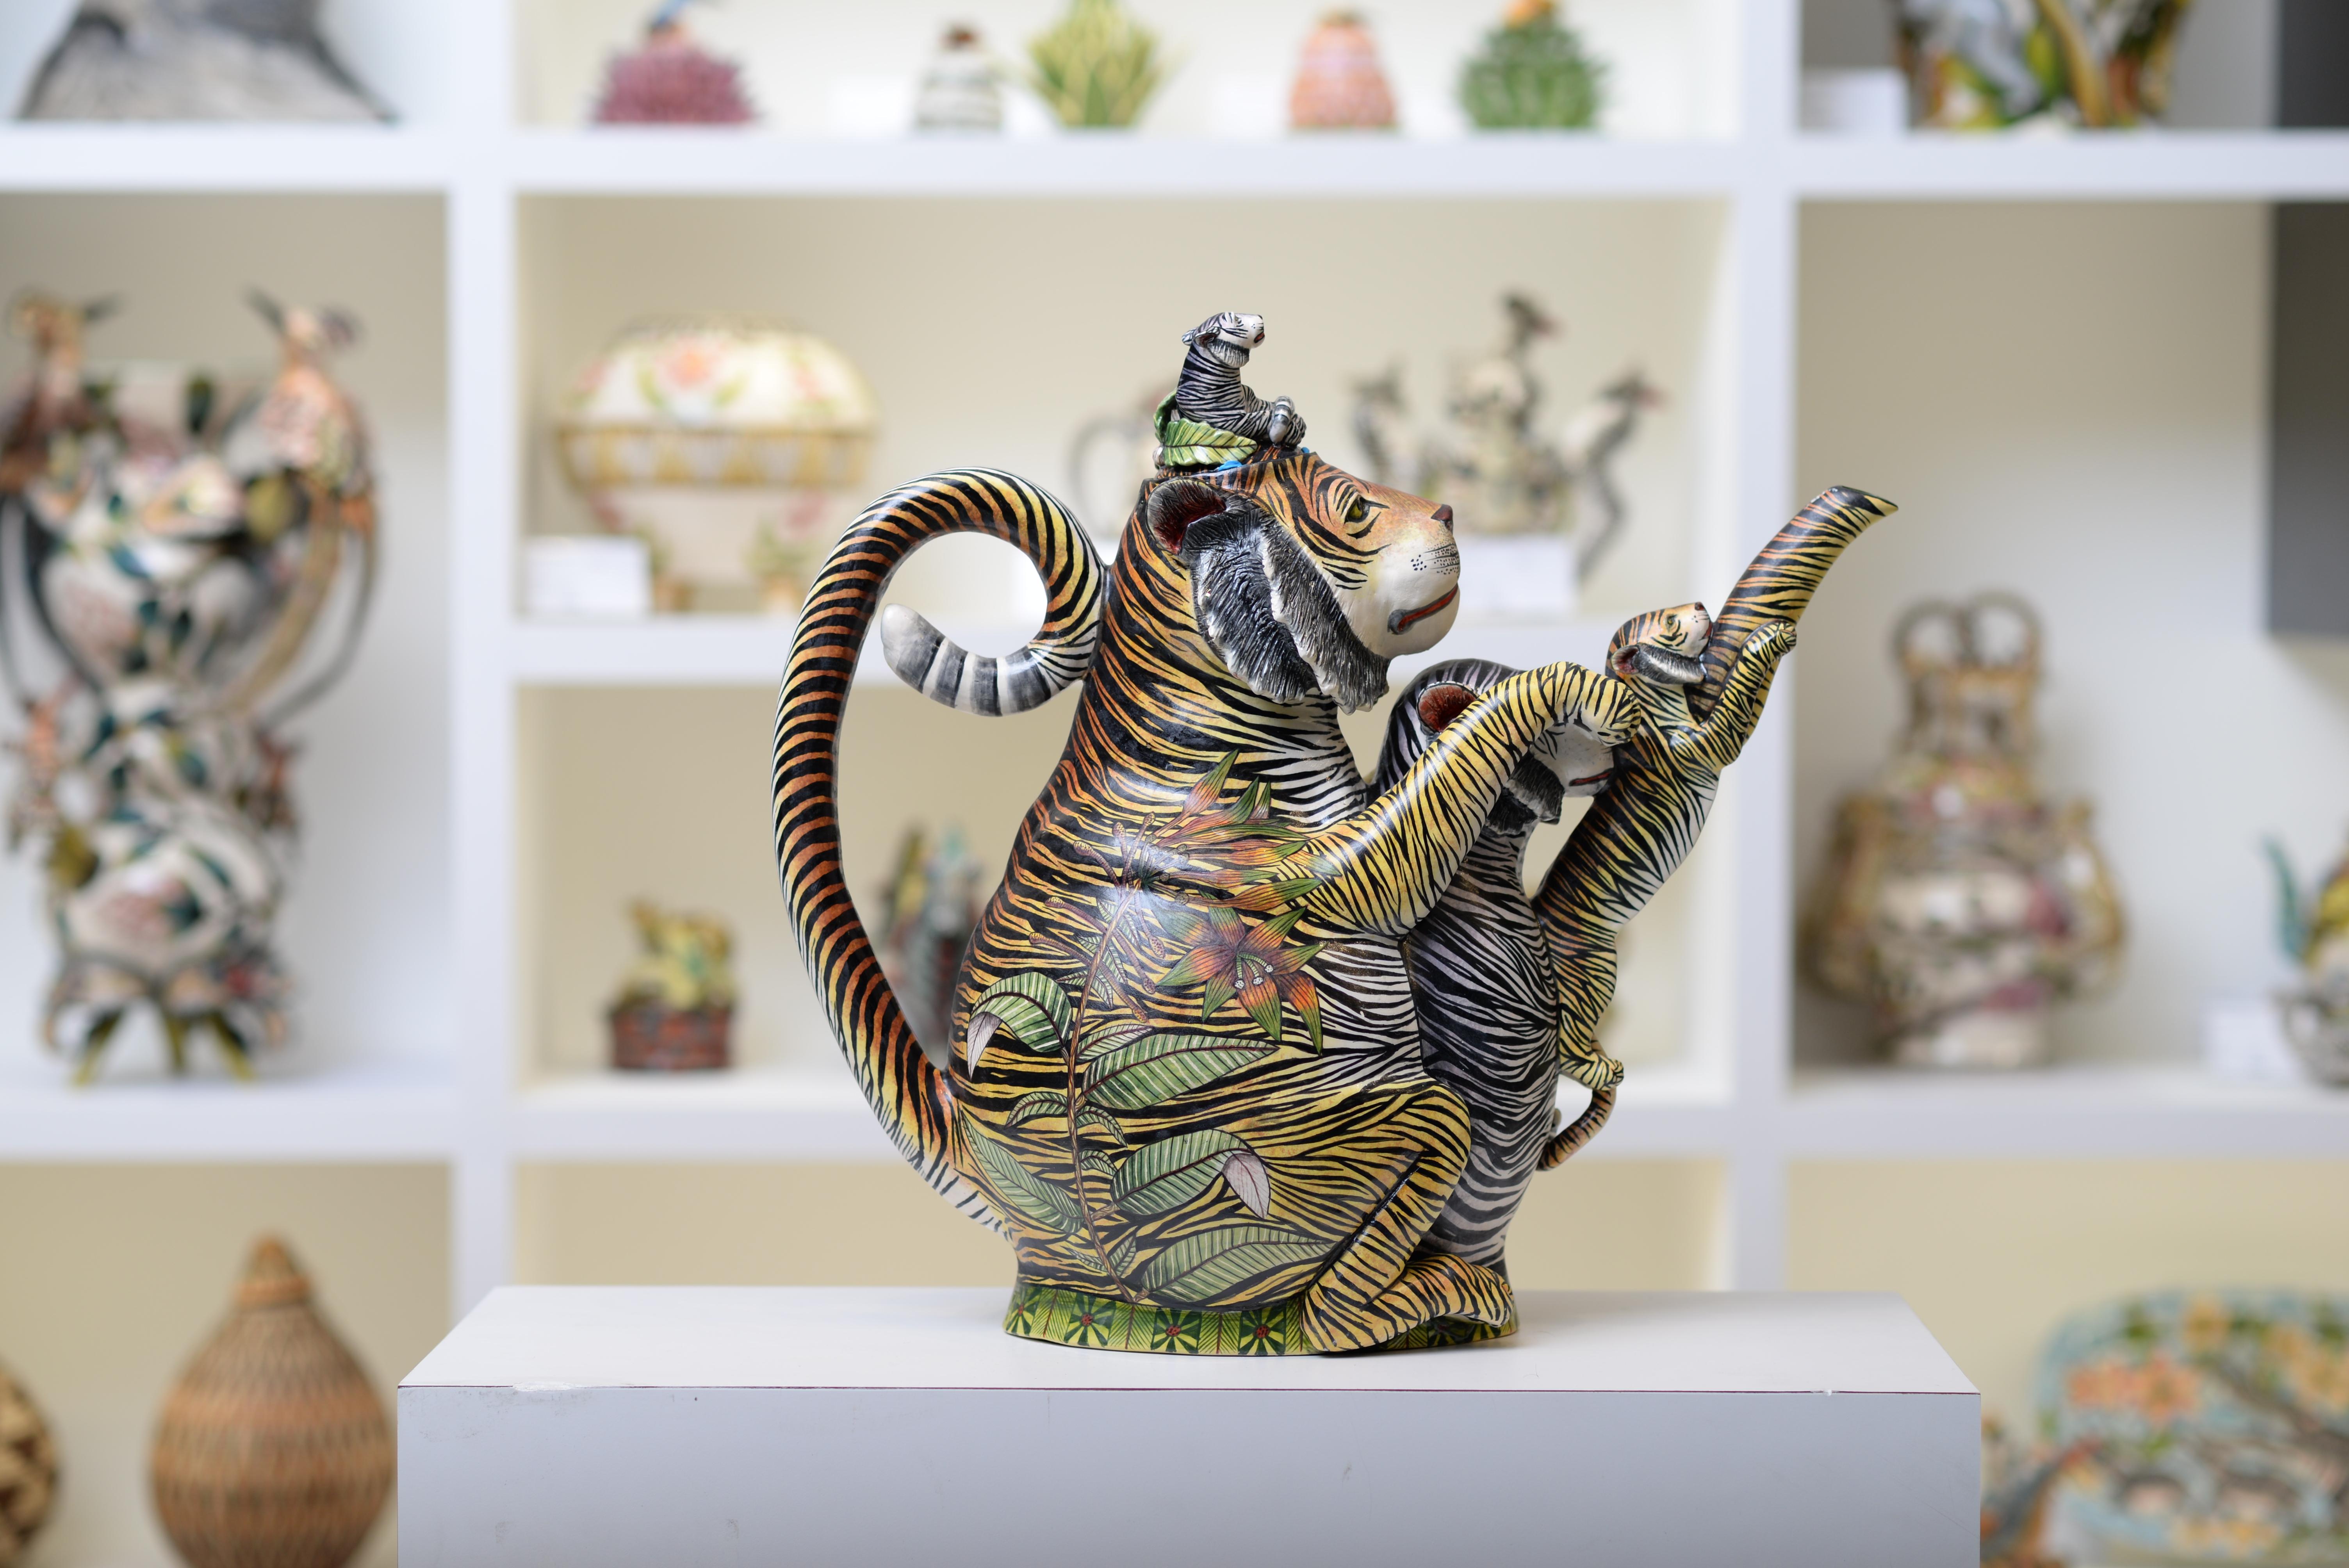 Fired Ardmore handmade African Ceramic Tiger Teapot For Sale